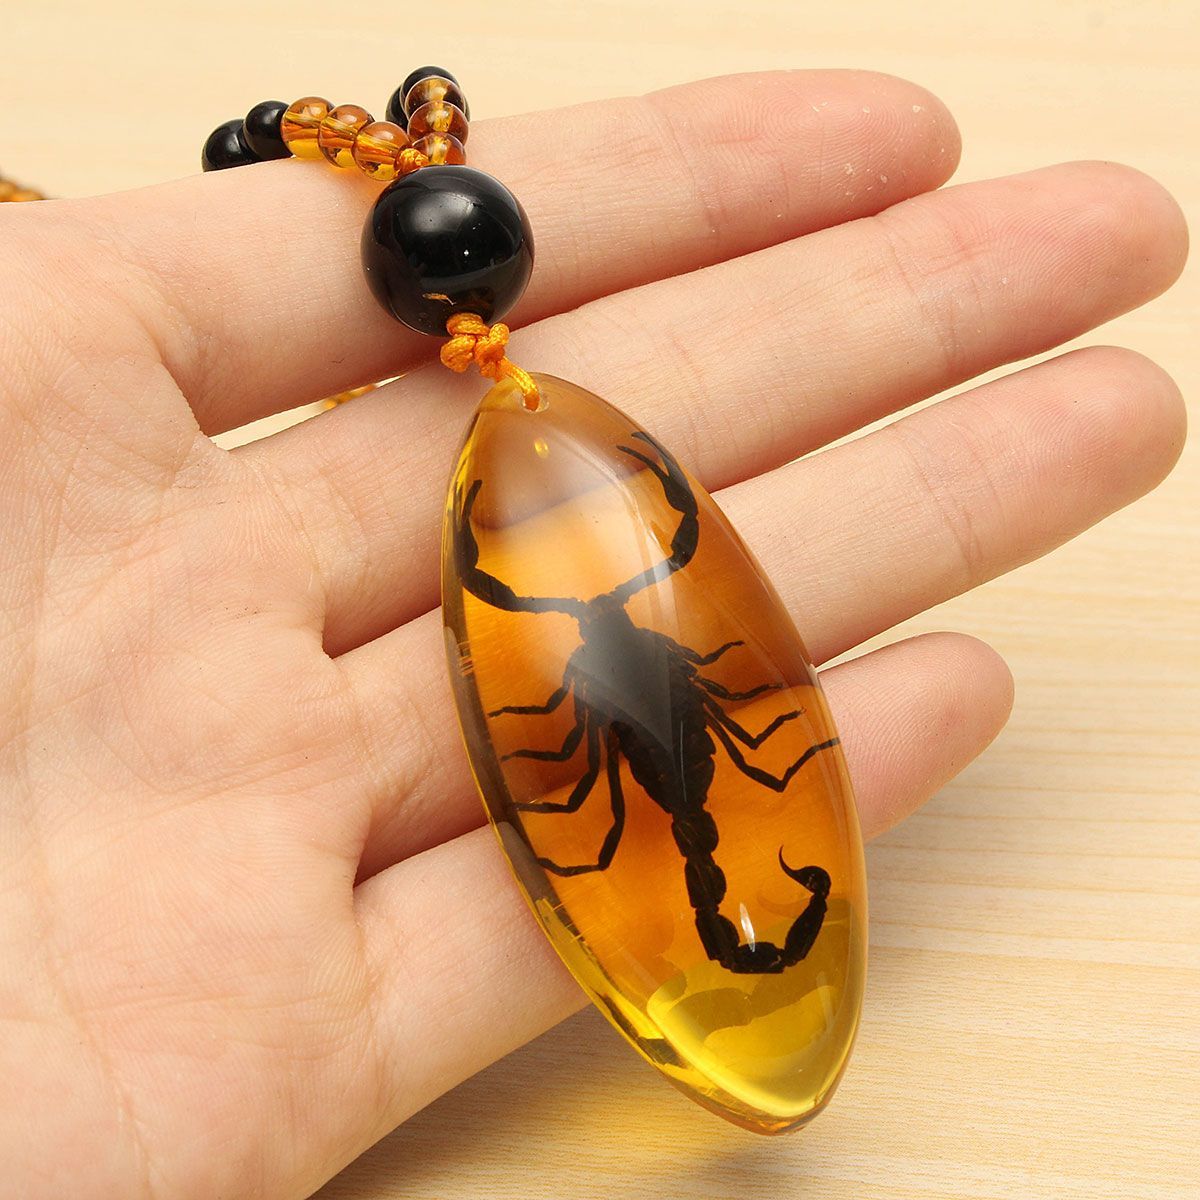 Unique-Natural-Insects-Amber-Scorpion-Inclusion-Pendant-Necklace-Gemstone-Ornament-Crafts-Gifts-Deco-1531113